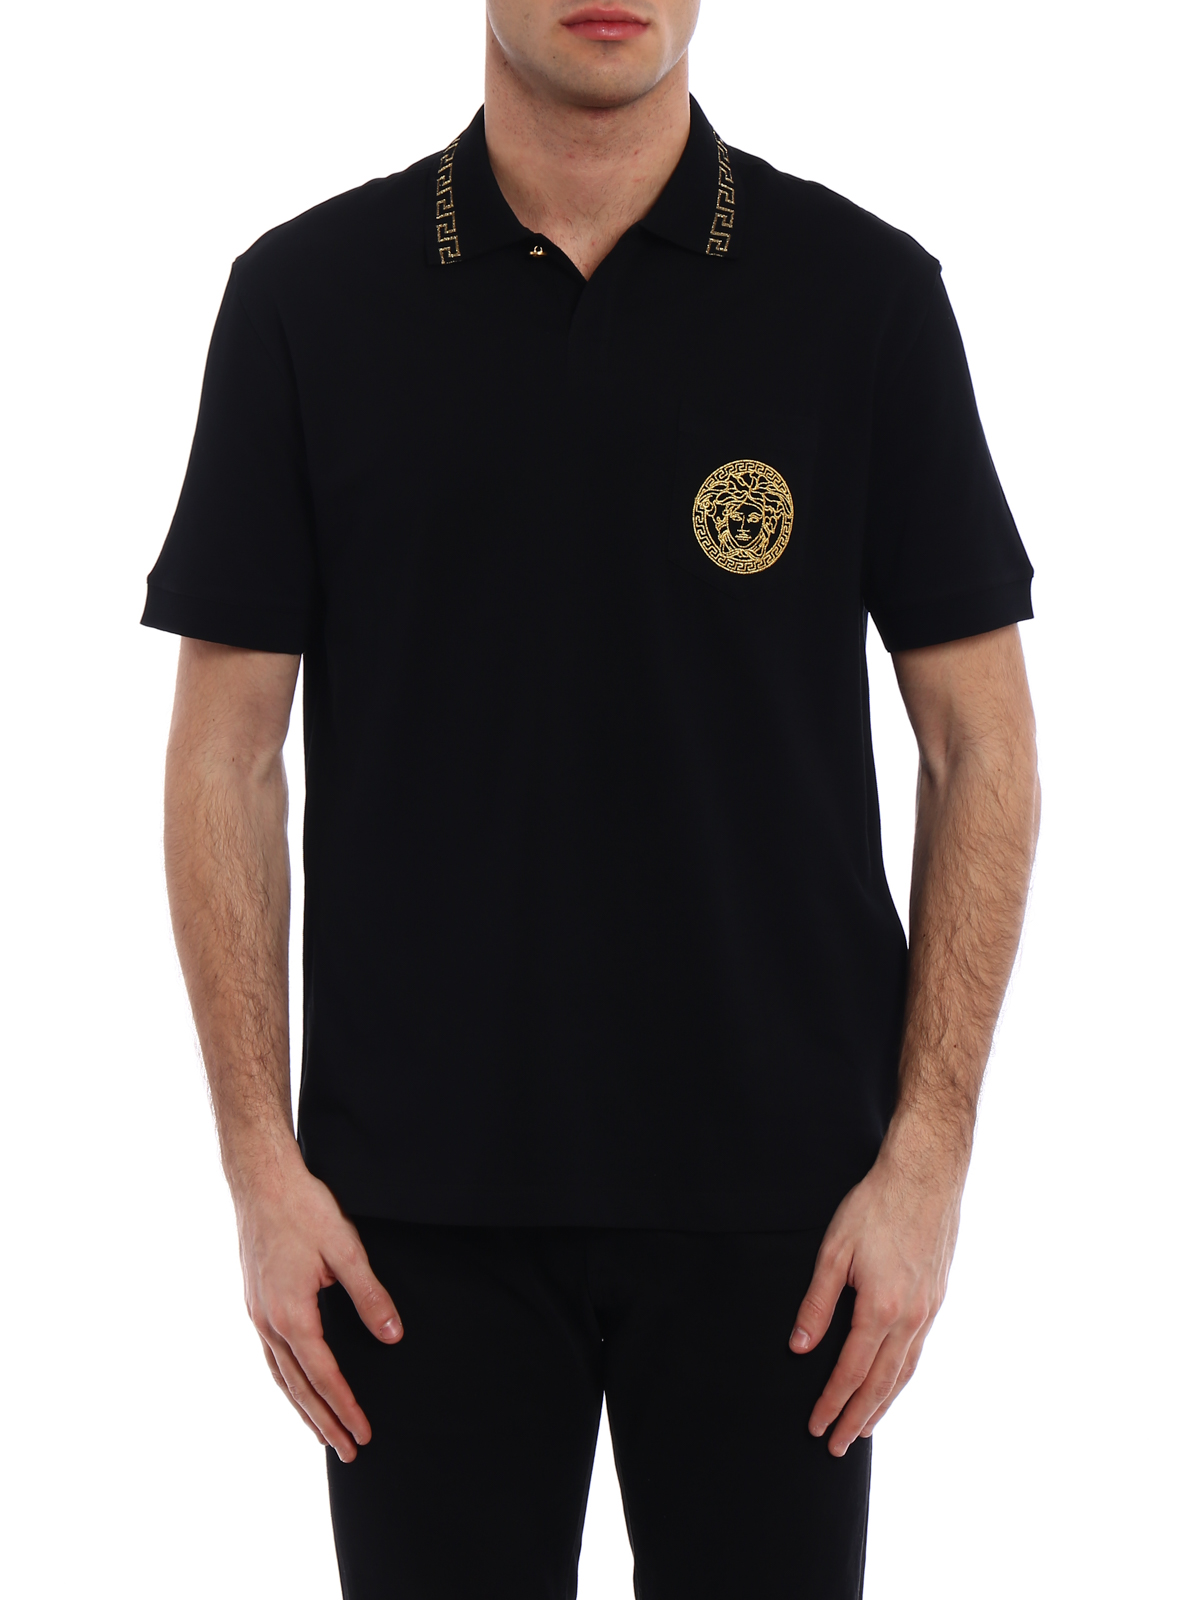 versace polo shirt black and gold online -